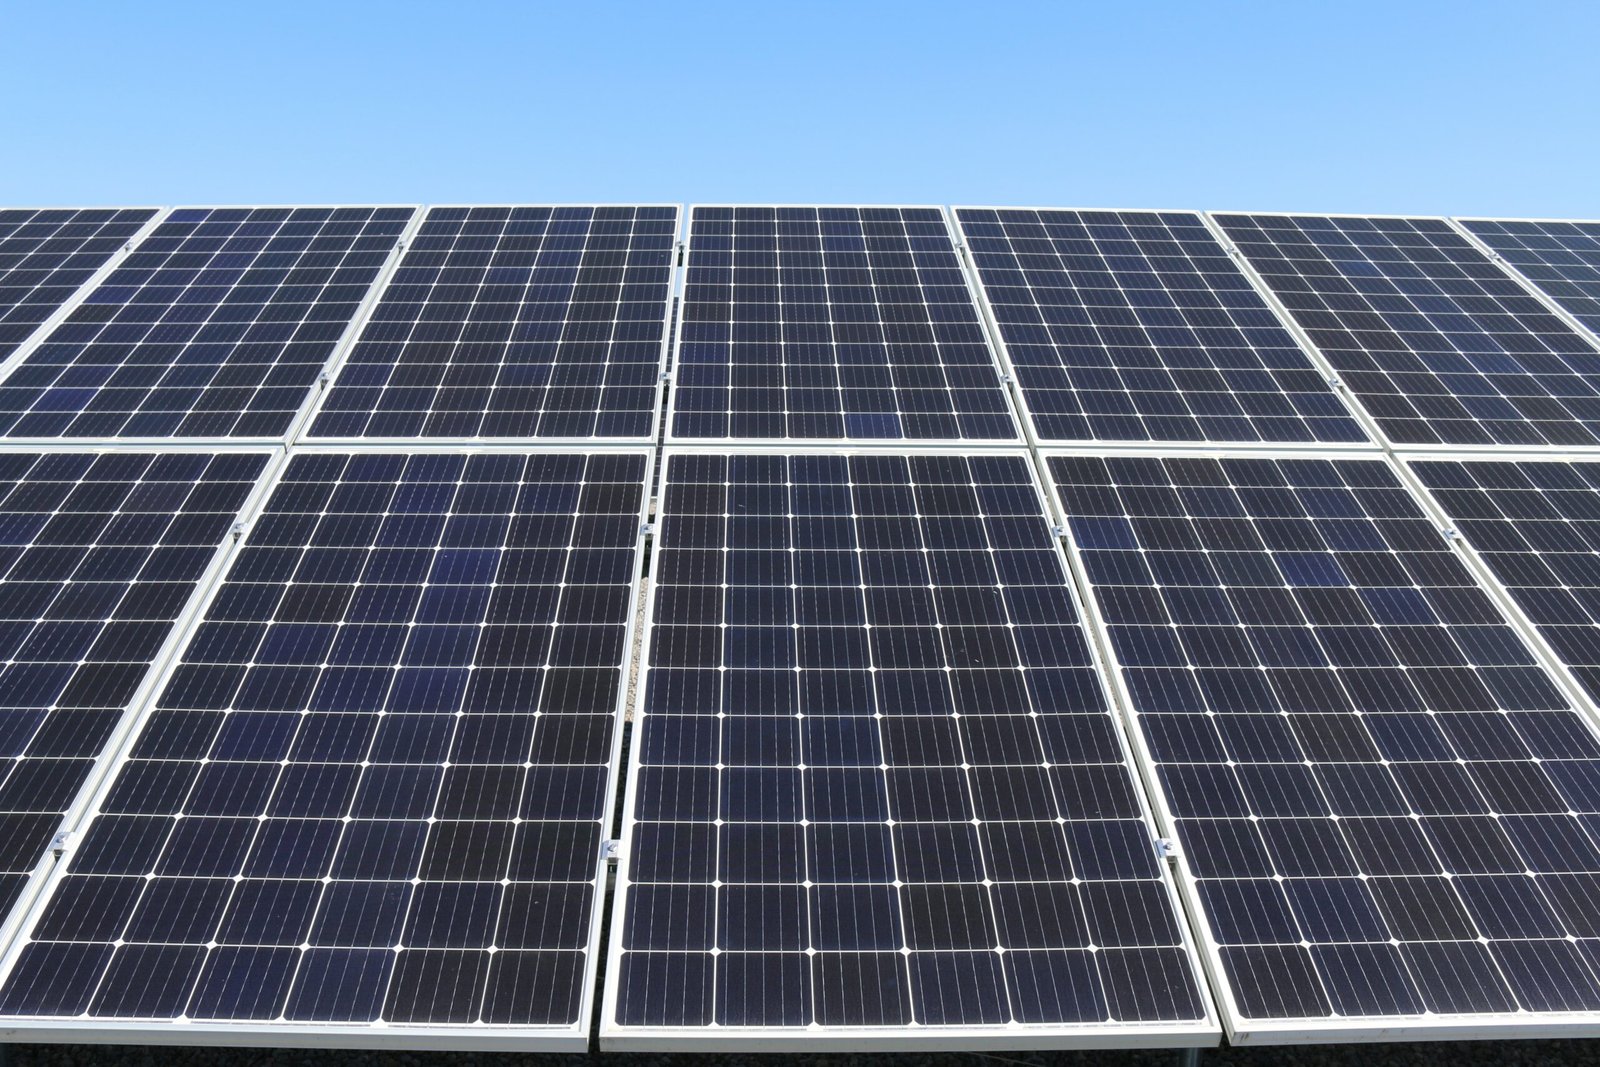 What are solar panels and how do they work?